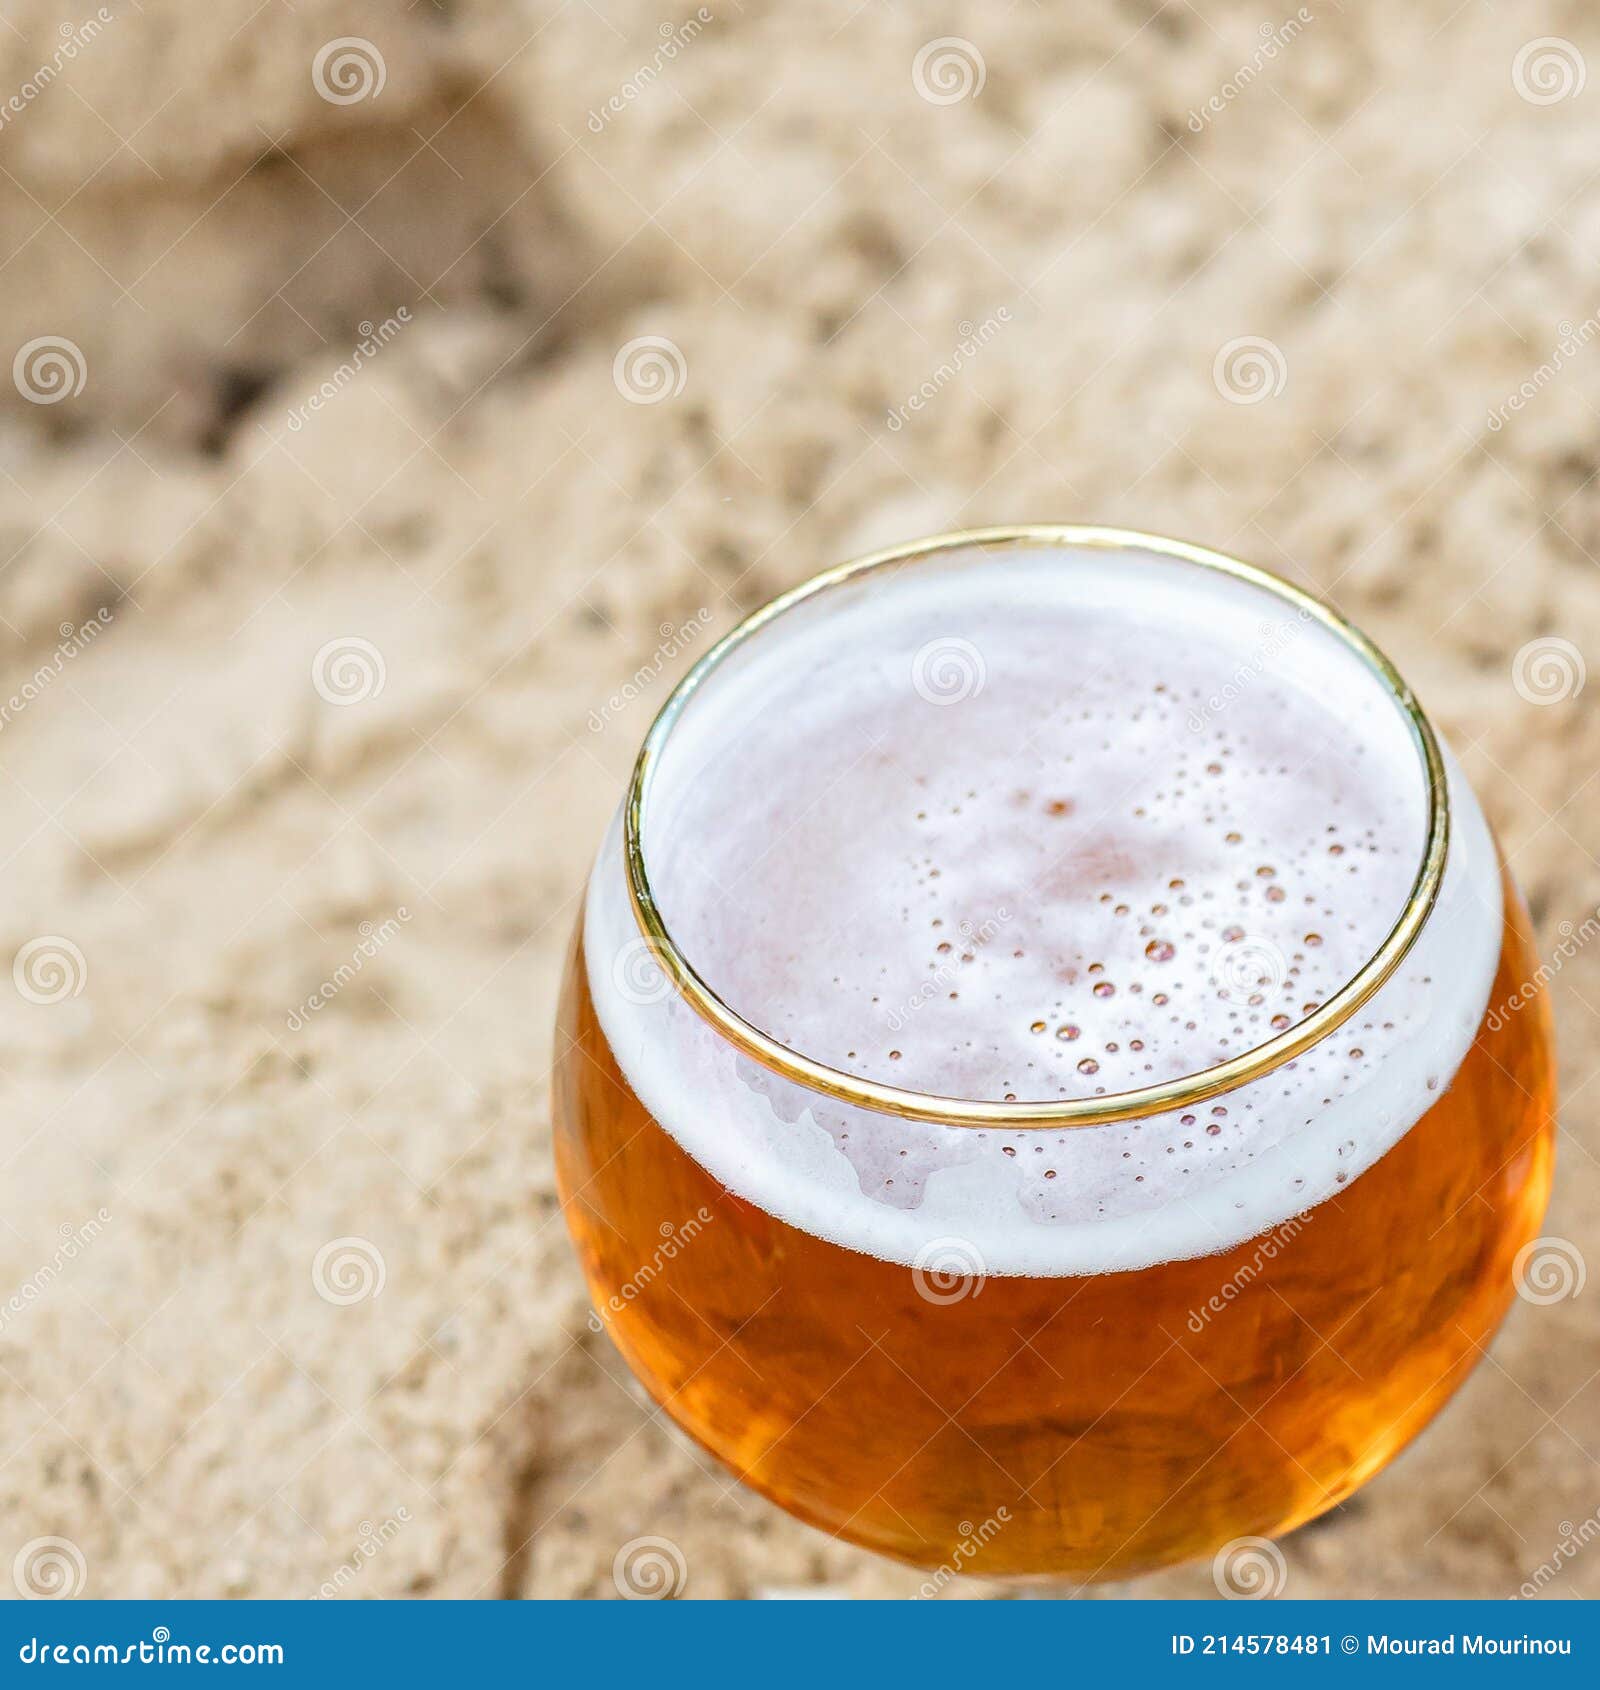 a close-up of a beer cup on the sand